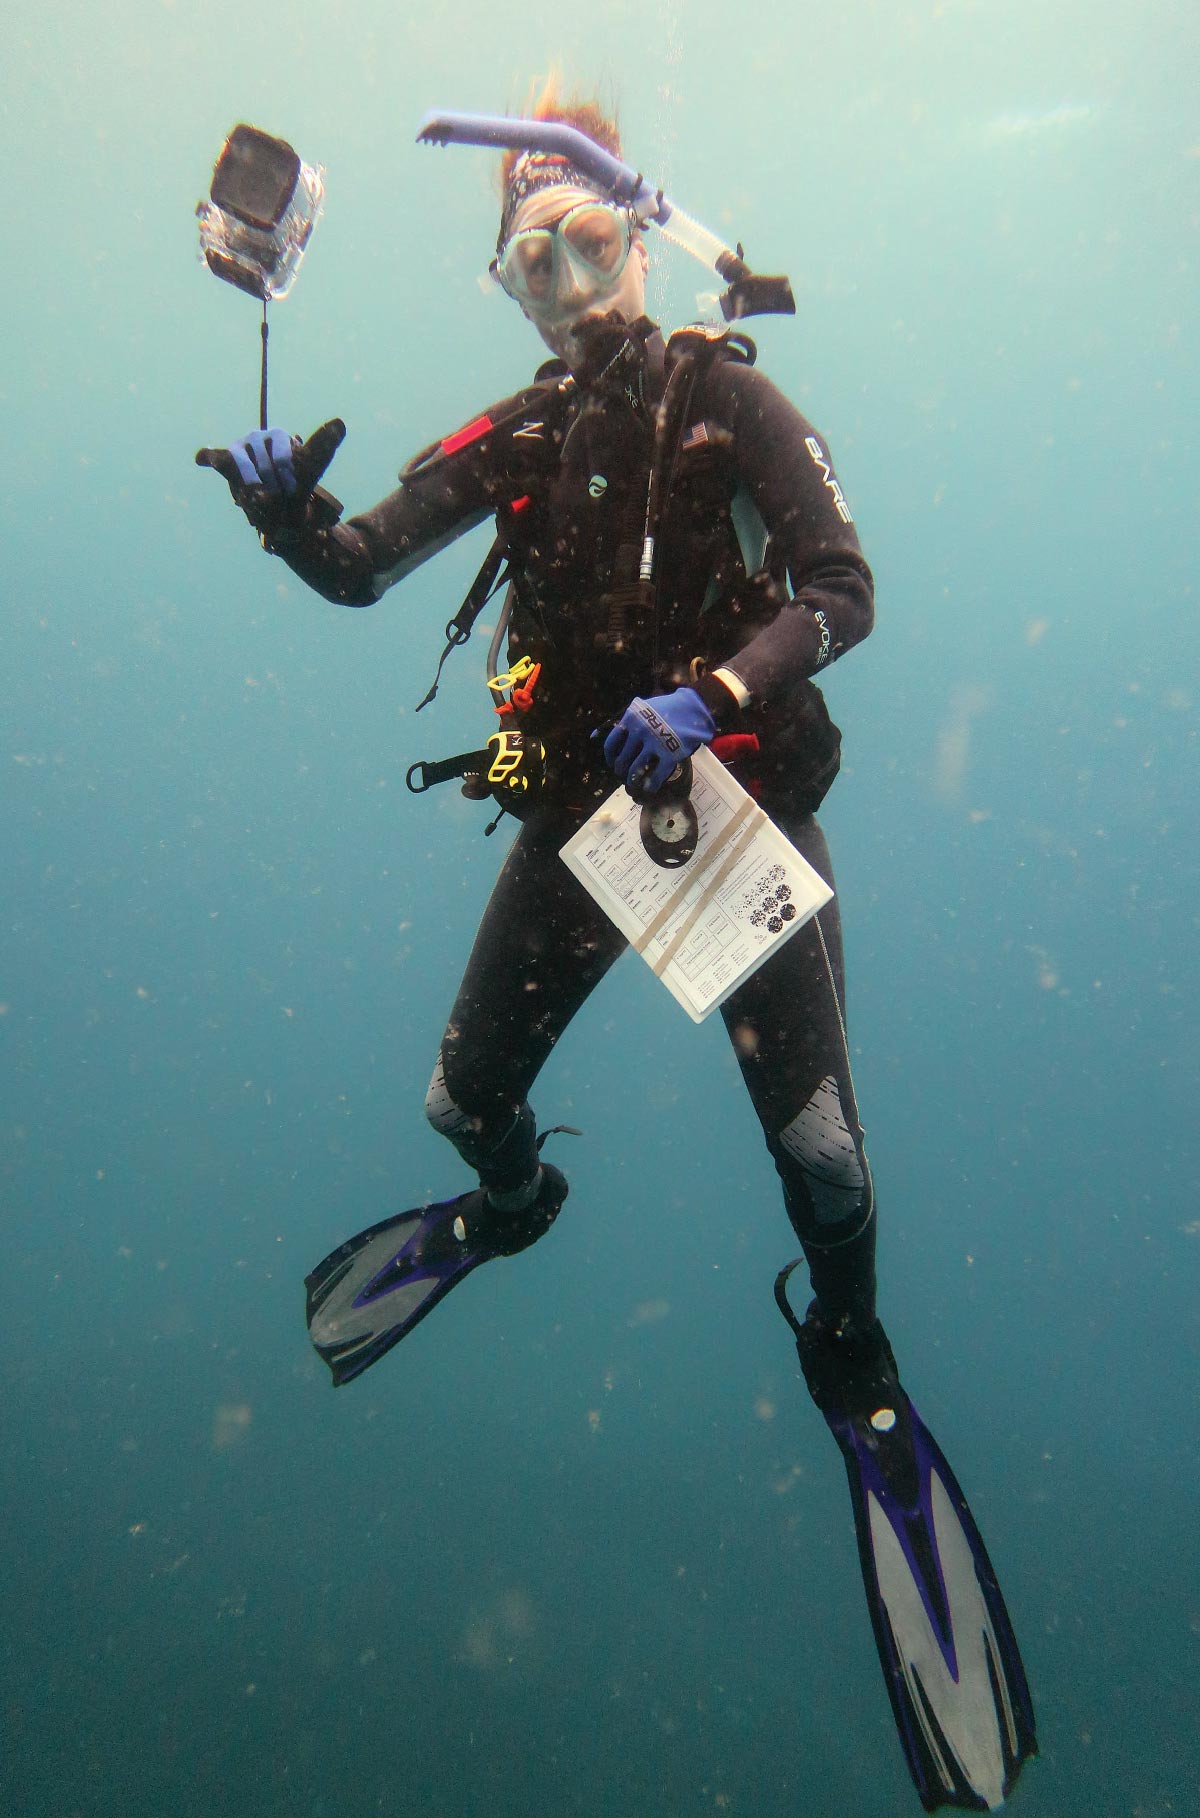 Heather Ylitalo-Ward underwater wearing a scuba suit. She is holding research notes, and a waterproof camera floats while tethered to her wrist.